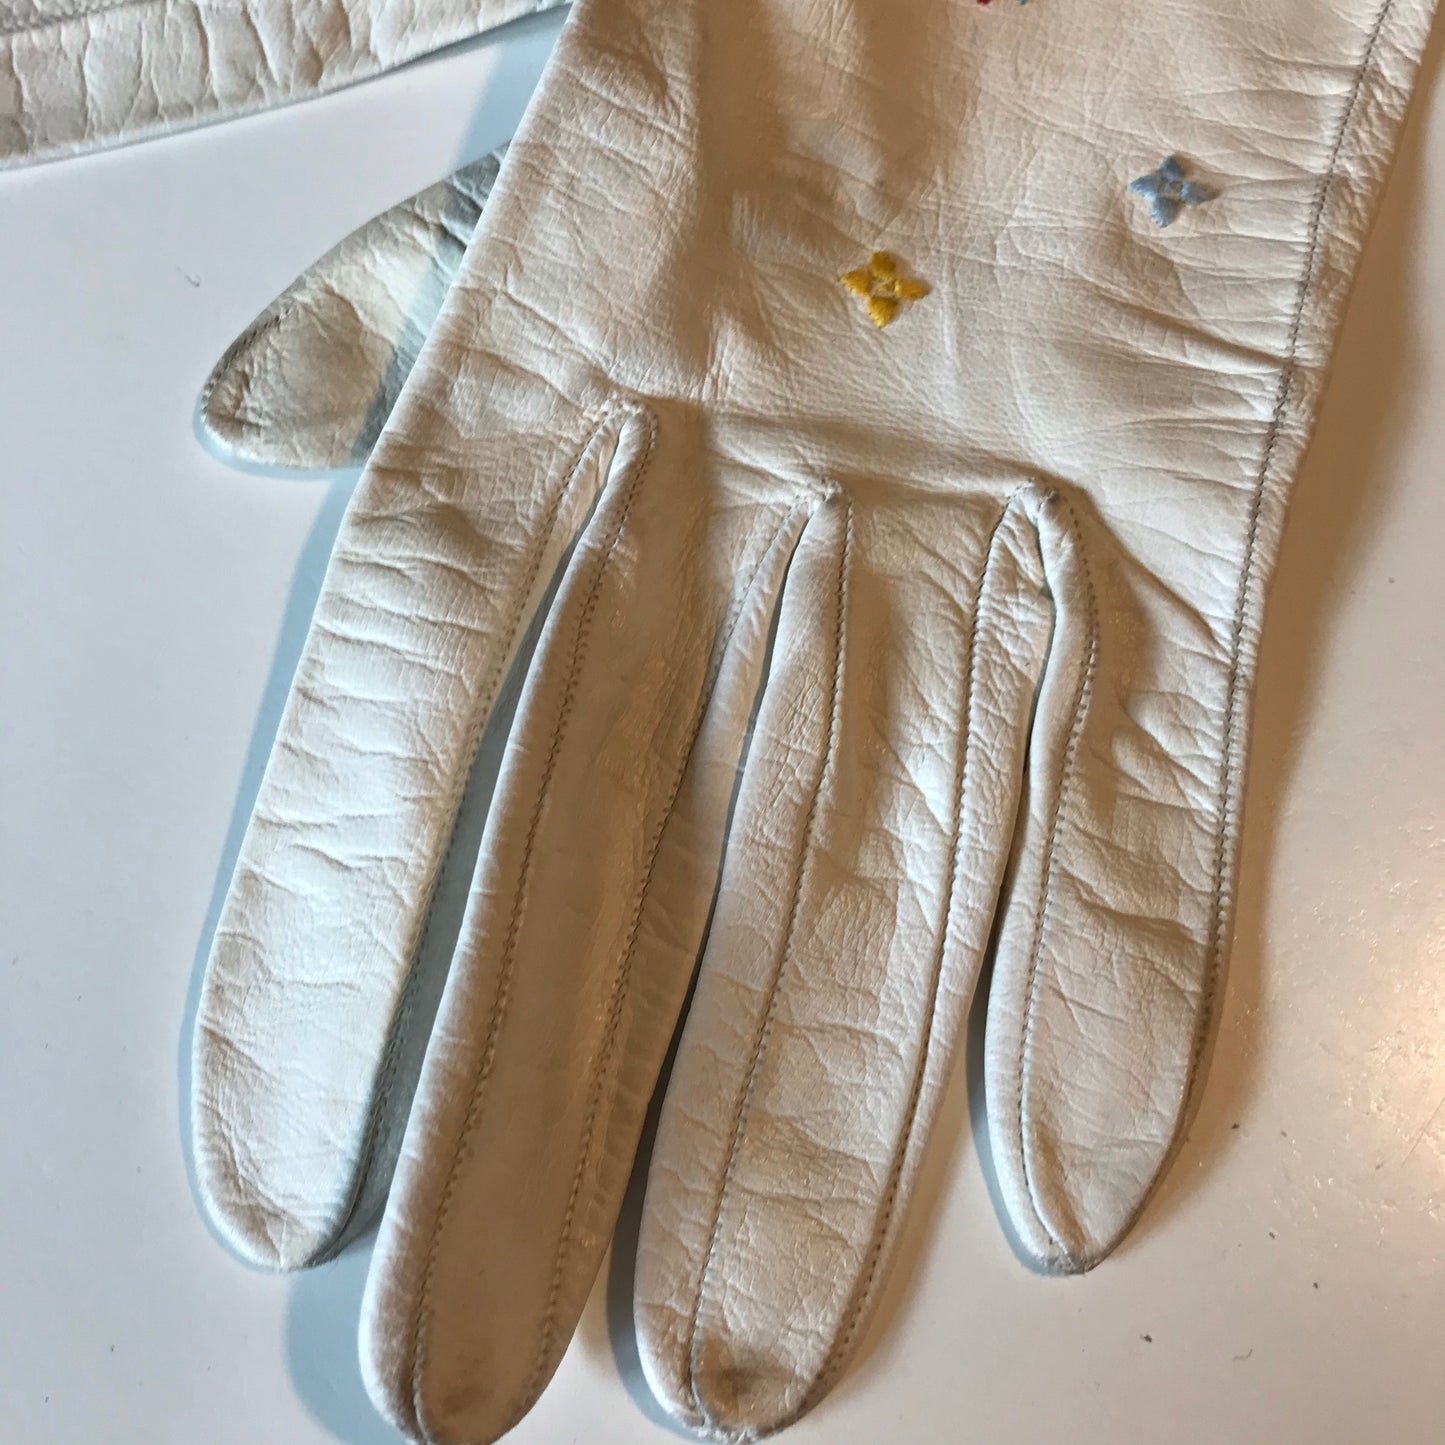 Pastel Floral Embroidered White Leather Gloves circa 1950s